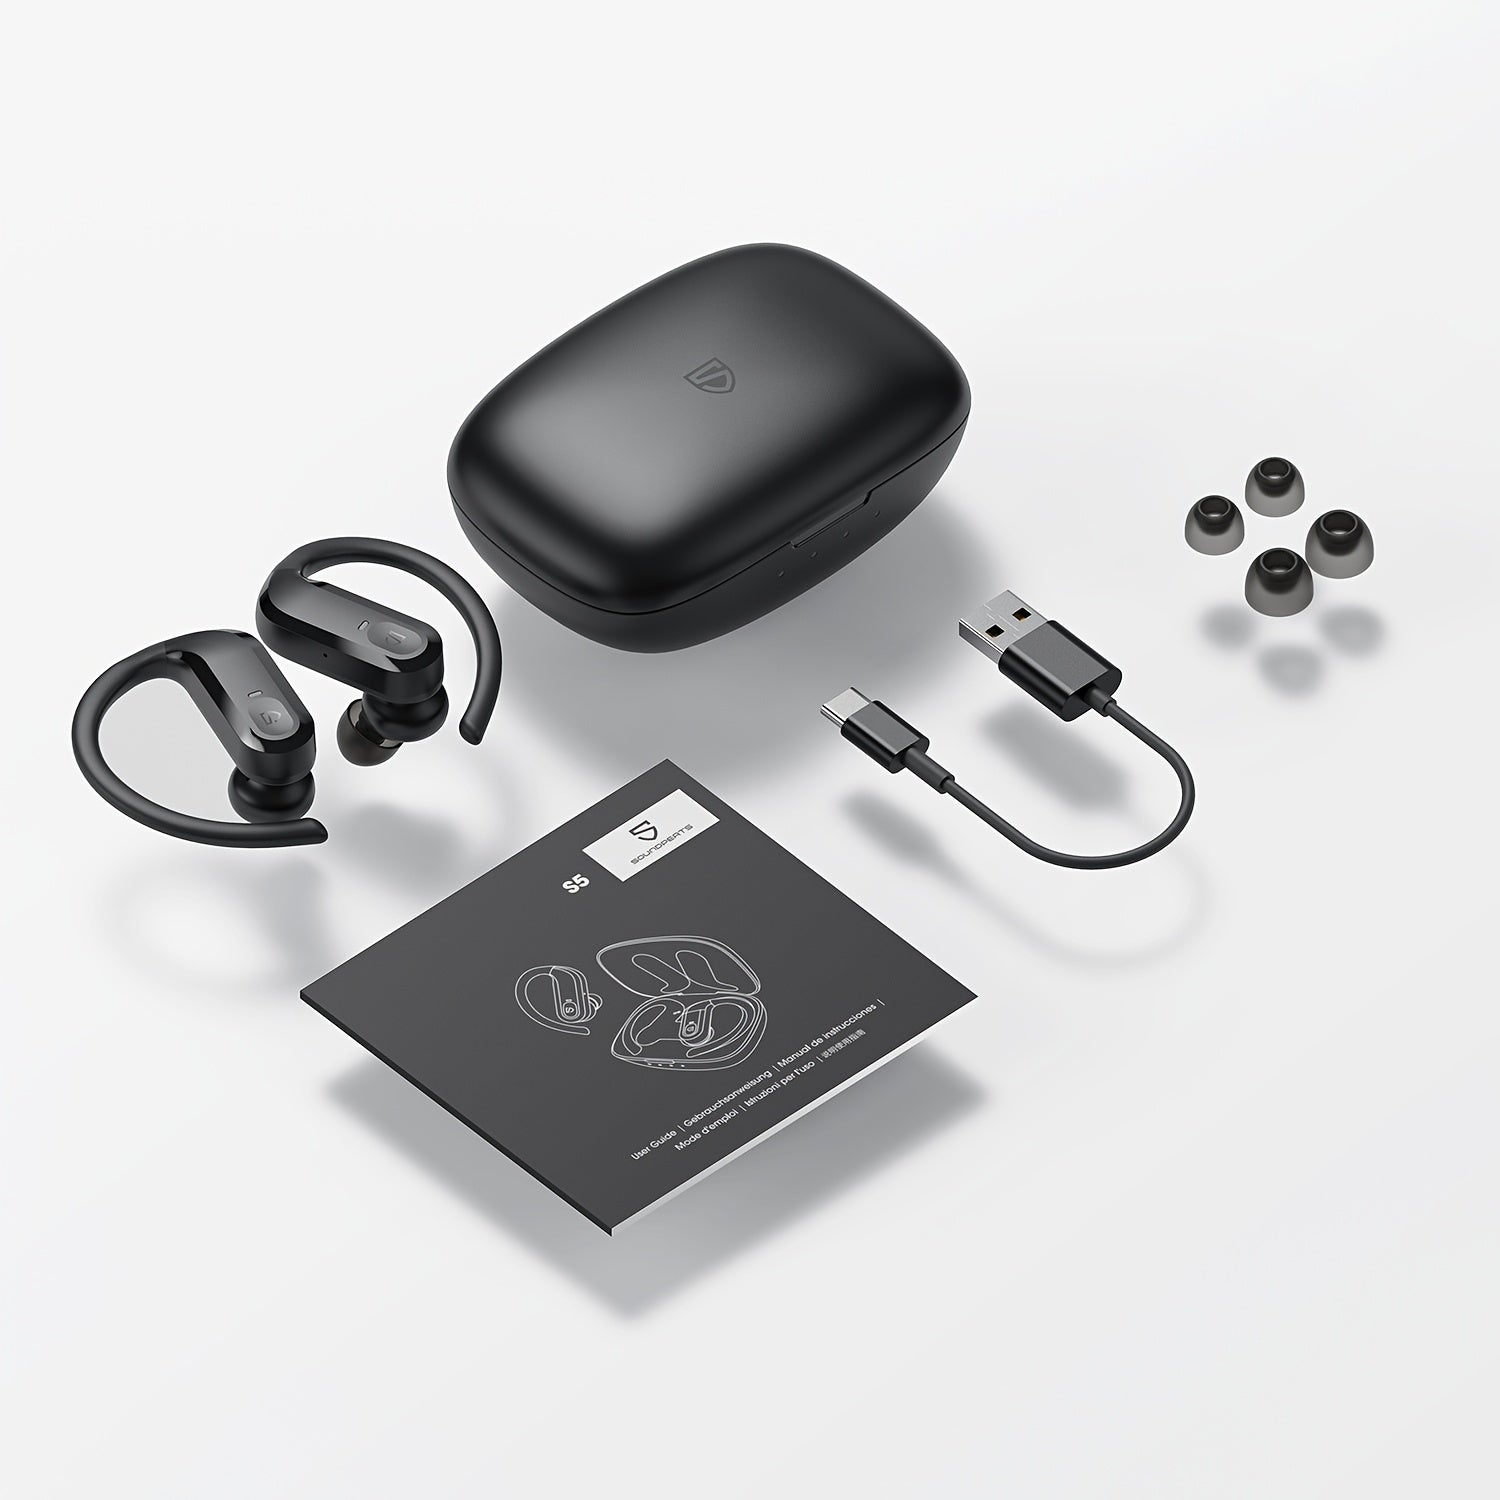 Soundpeats S5 Wireless Earbuds: BT 5.0 Headphones With Touch Control, IPX7 Waterproof, 12mm Drivers & Mono/Stereo Mode - Perfect For Sports